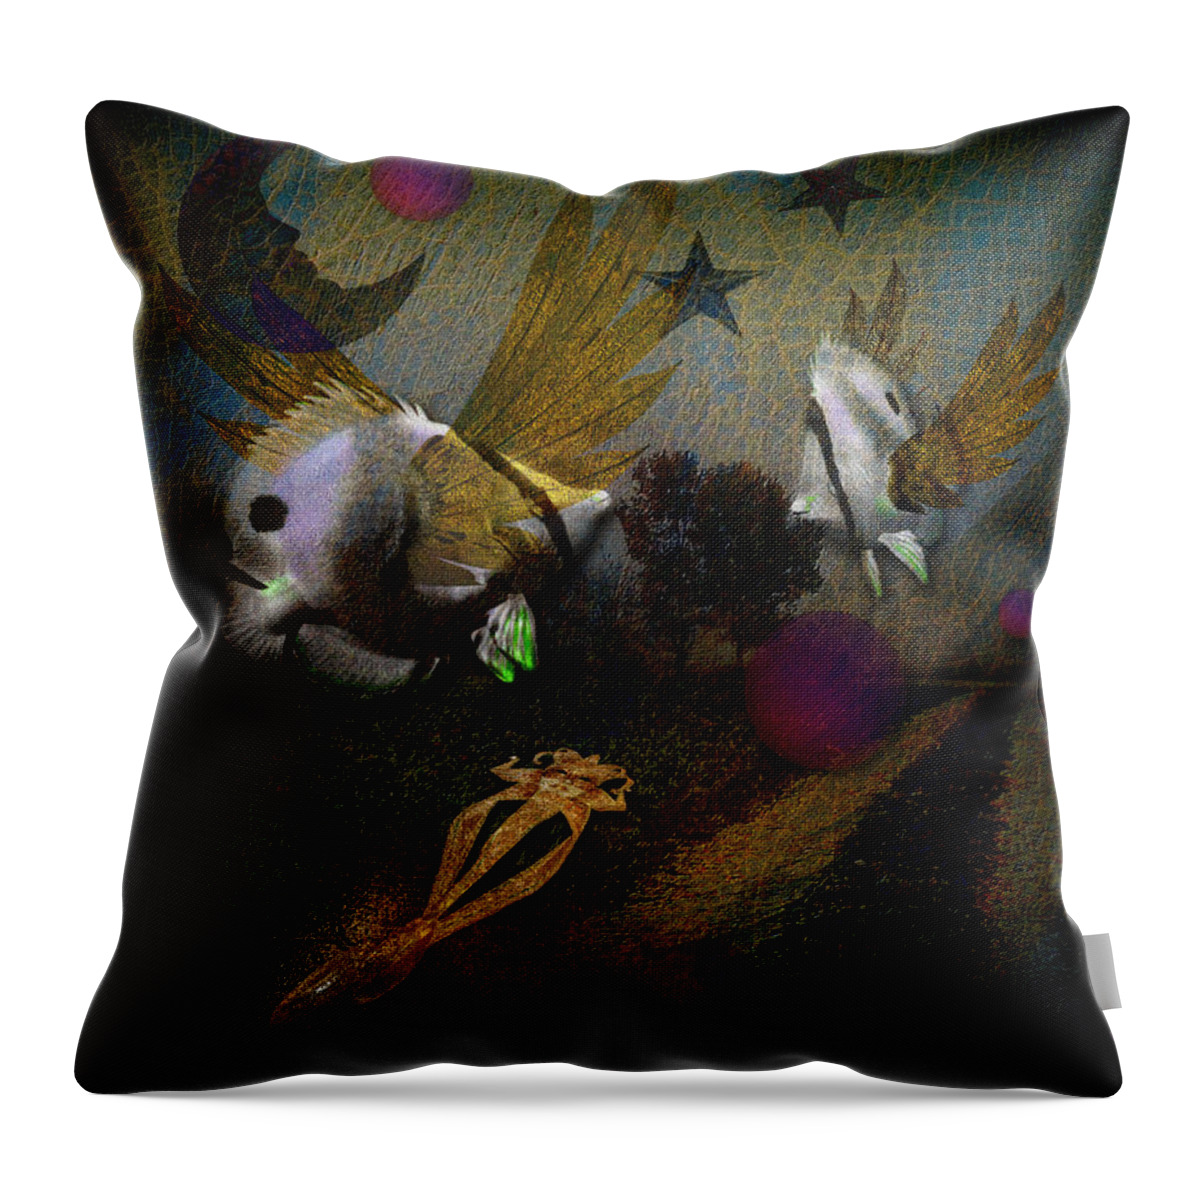 Fish Throw Pillow featuring the digital art Angel Fish by Mimulux Patricia No